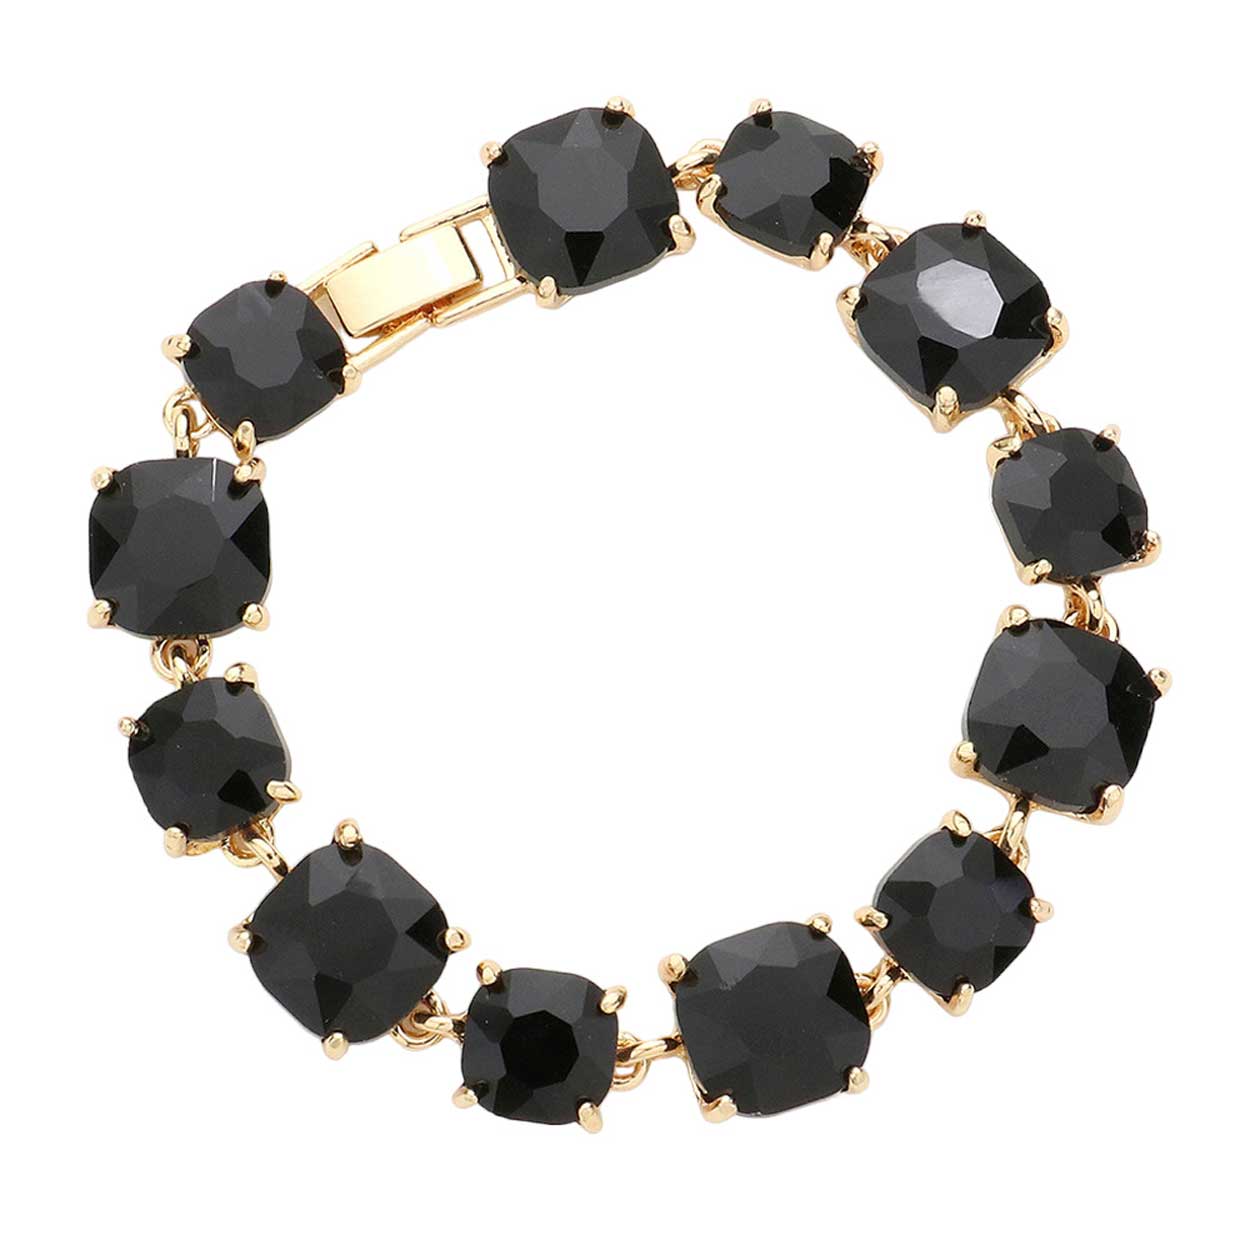 Black Diamond Cushion Square Stone Link Evening Bracelet, is the perfect accessory for any occasion. Crafted with a diamond-like cut and a gorgeous link pattern, this bracelet is sure to turn heads. This unique design is sure to make look stylish. Crafted with attention to detail, this bracelet will add a touch of glamour to attire.